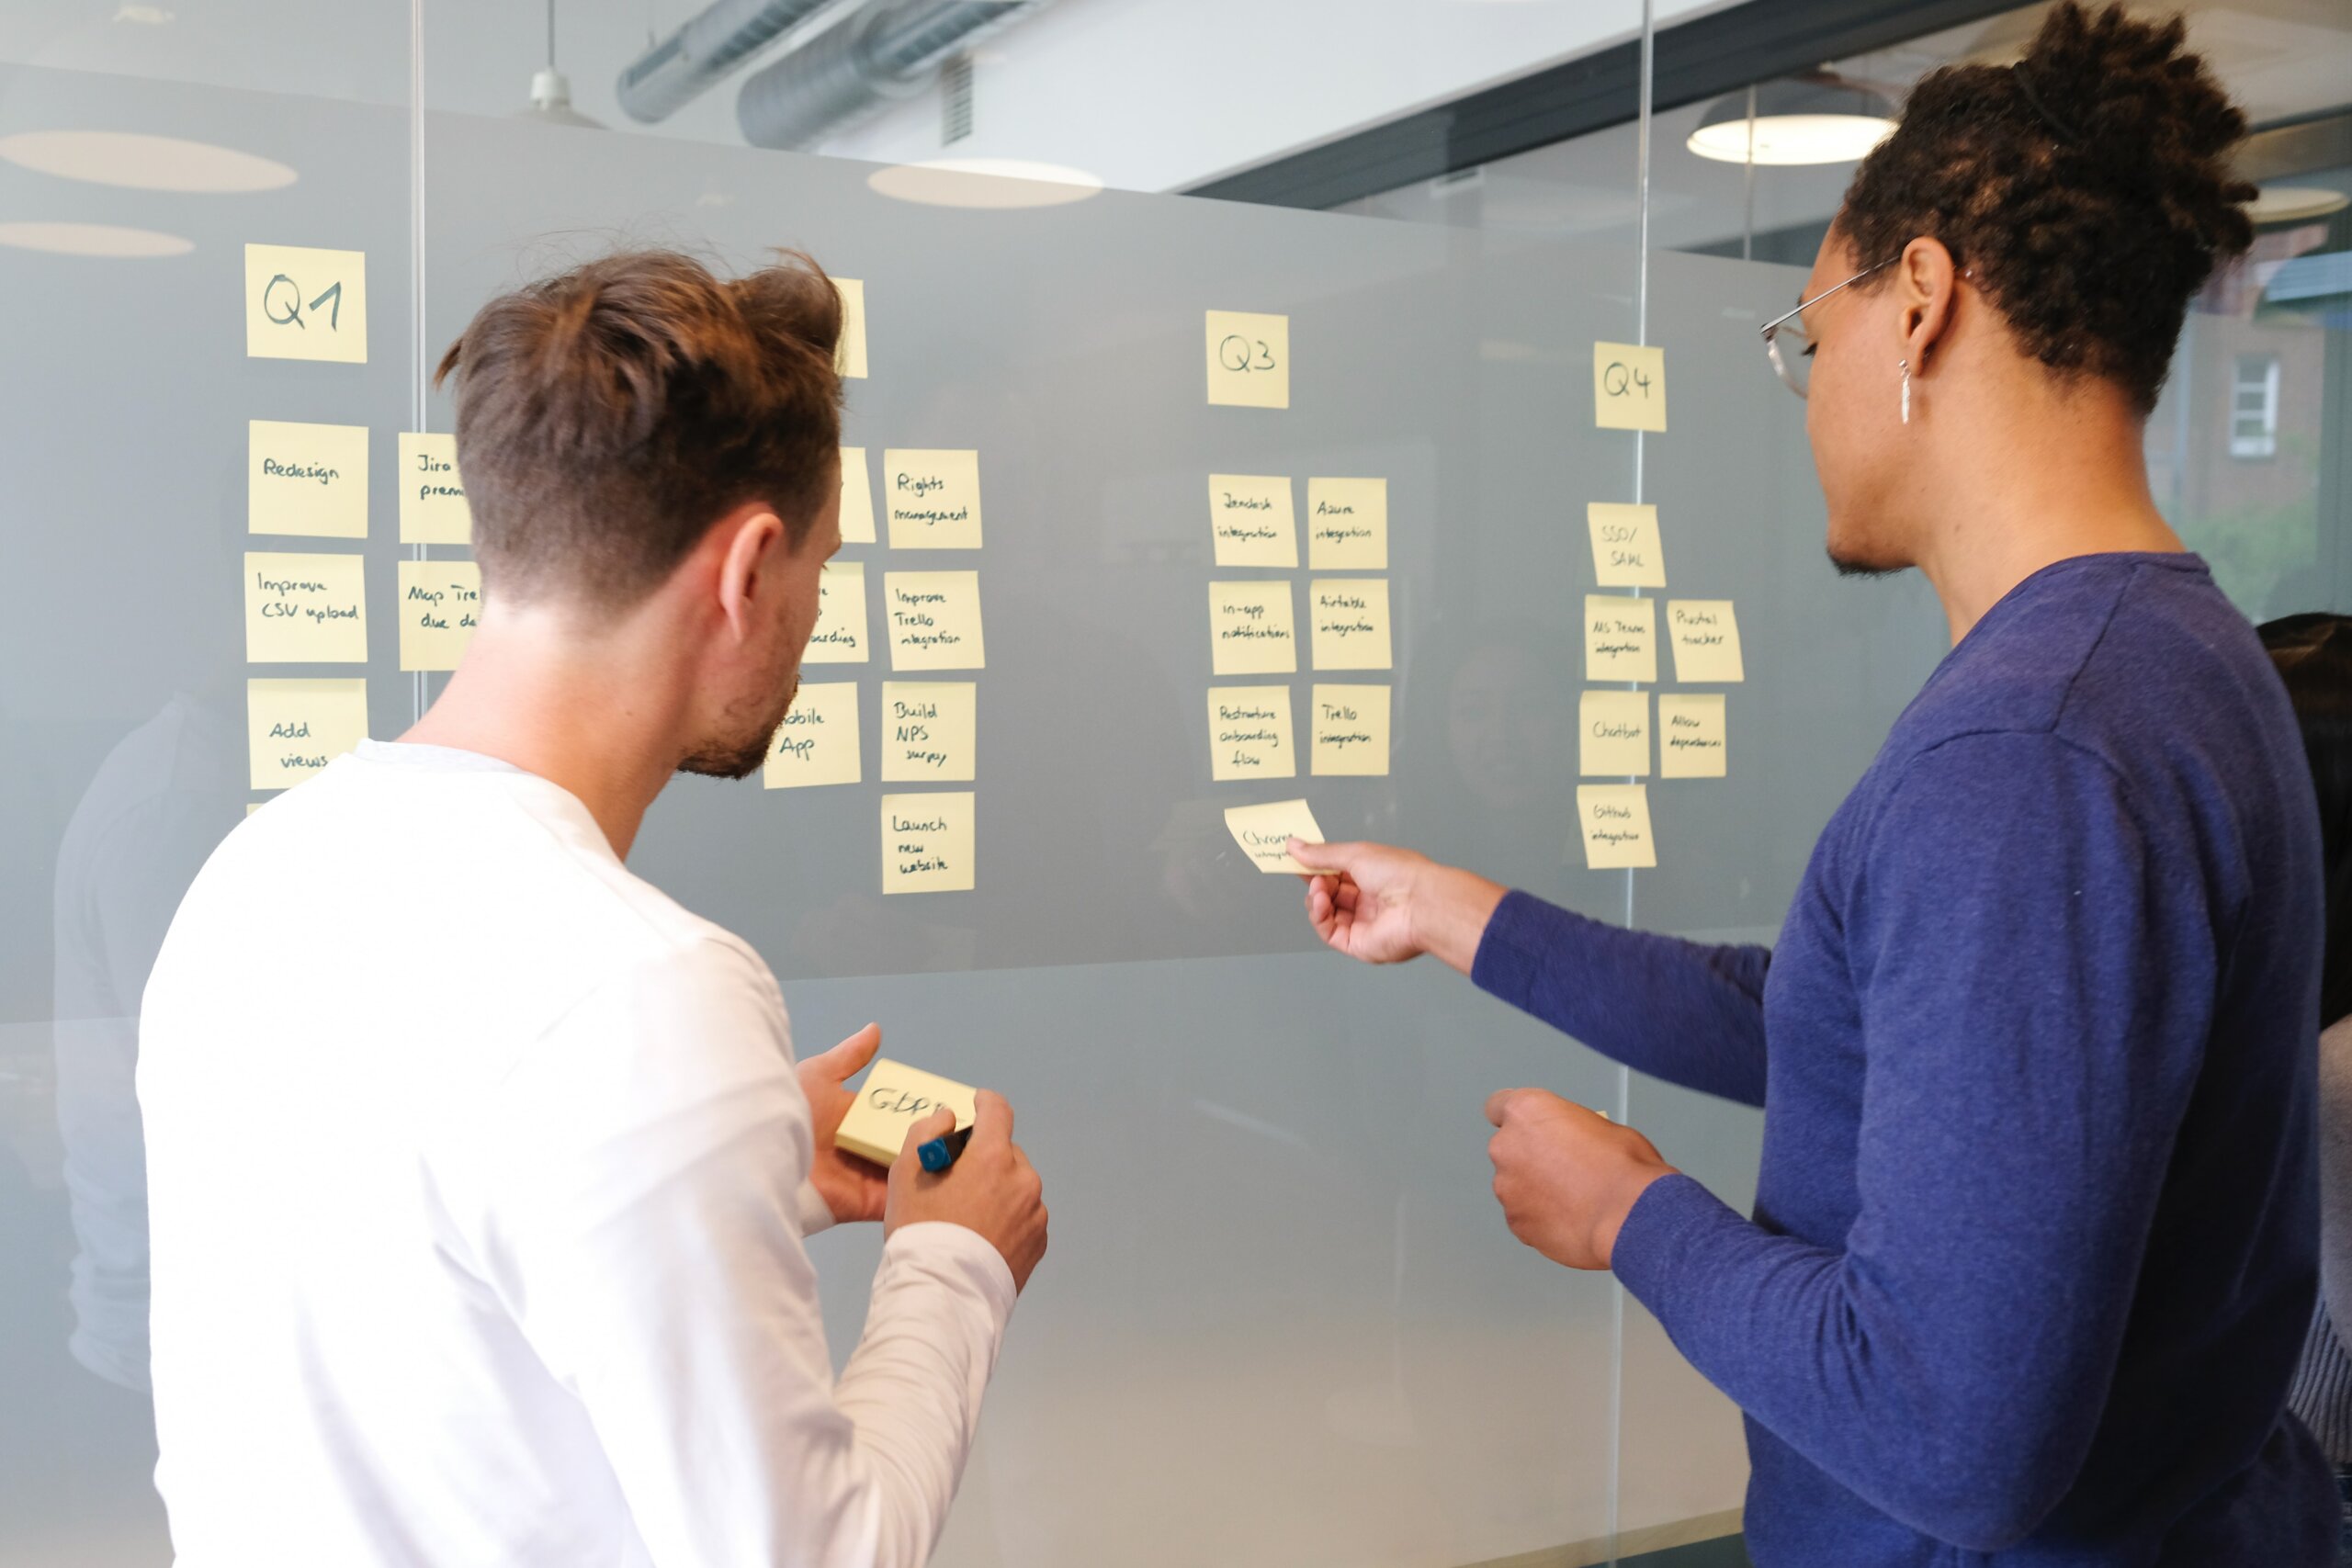 Two designers examining post-its on a wall